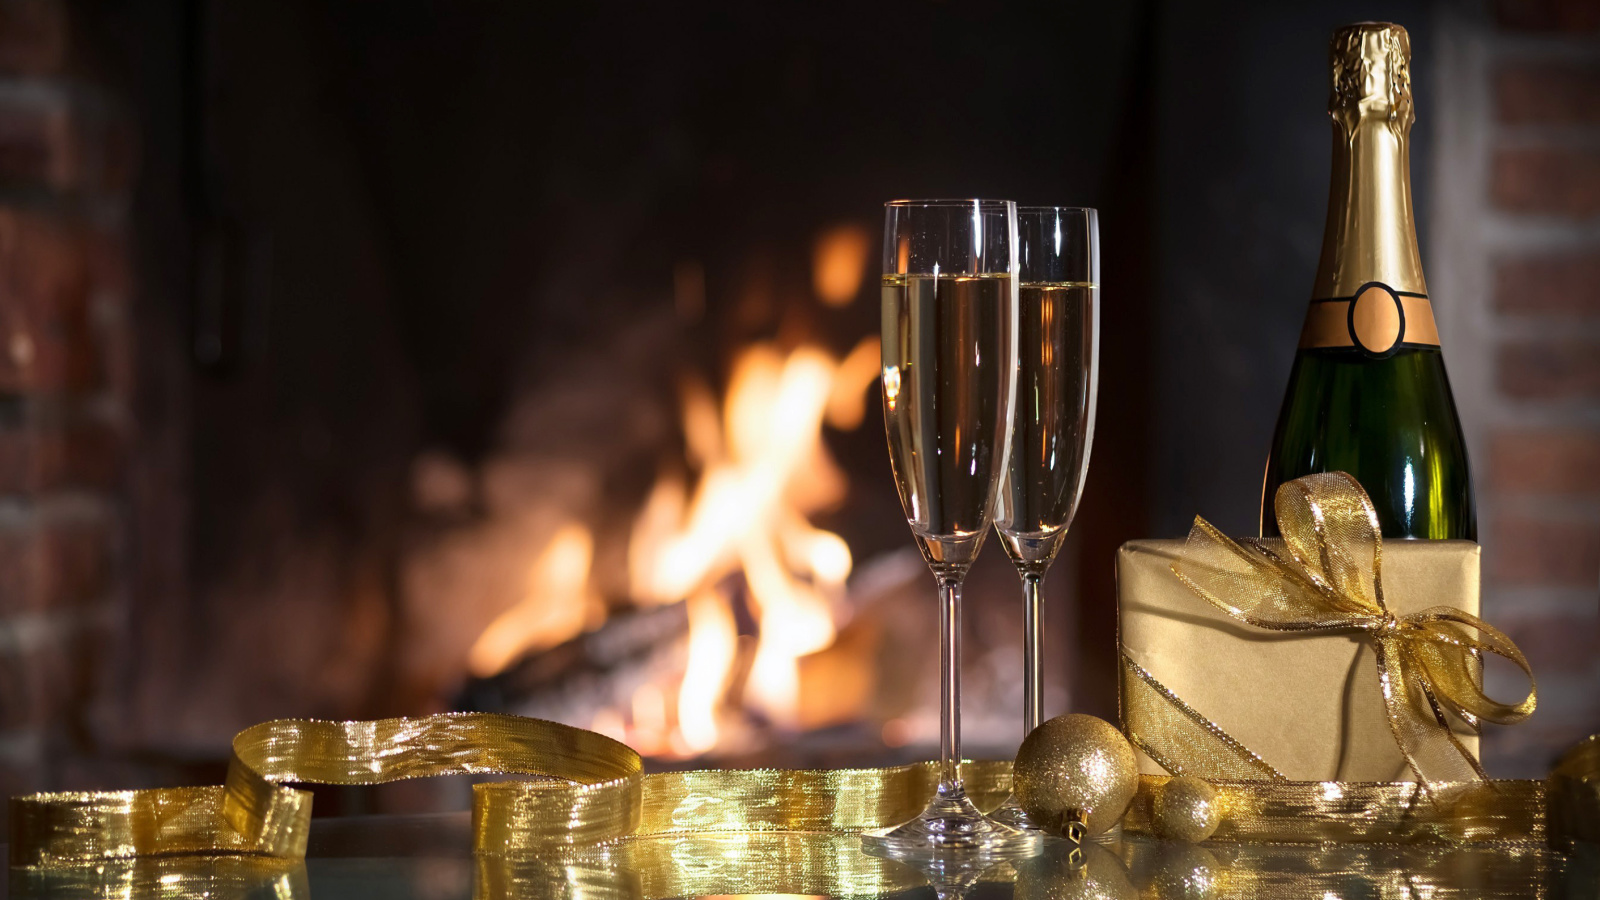 Champagne and Fireplace wallpaper 1600x900